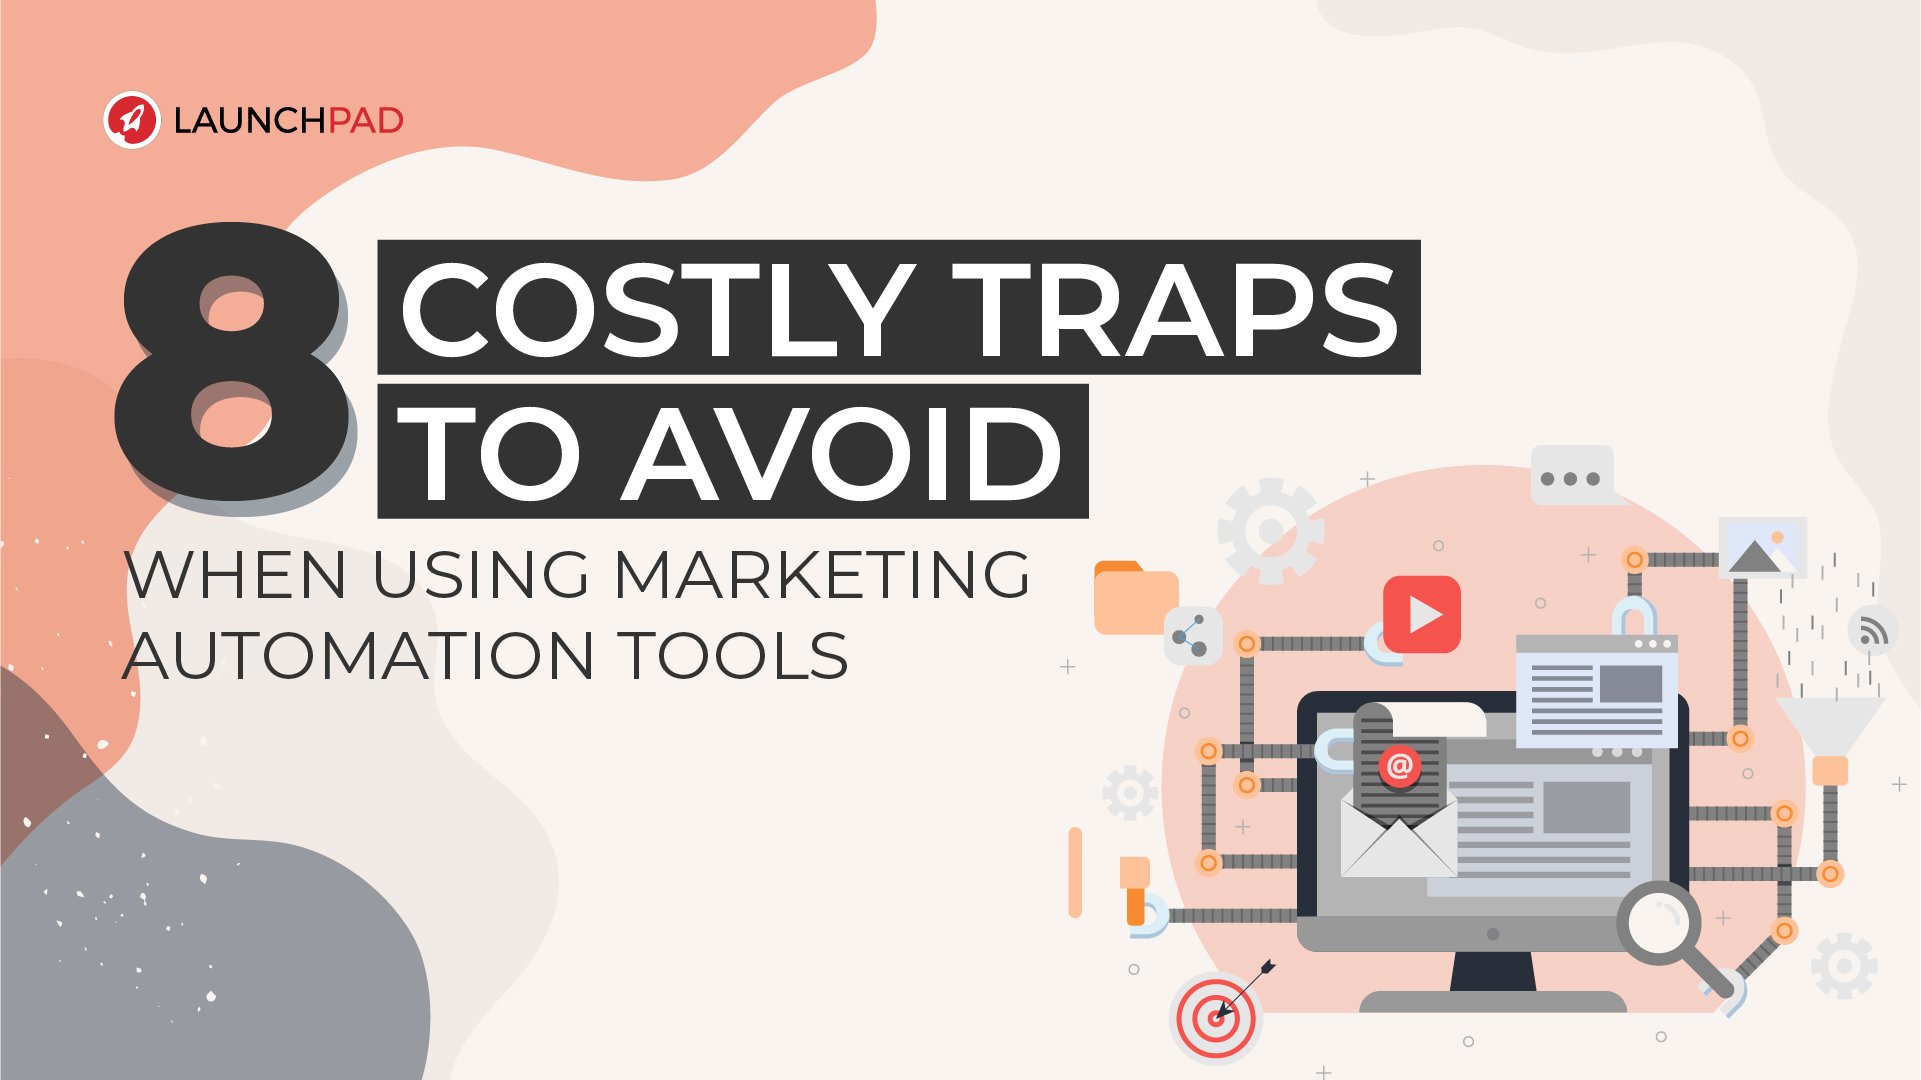 Launchpad- 8 Costly Traps to Avoid When Using Marketing Automation Tools